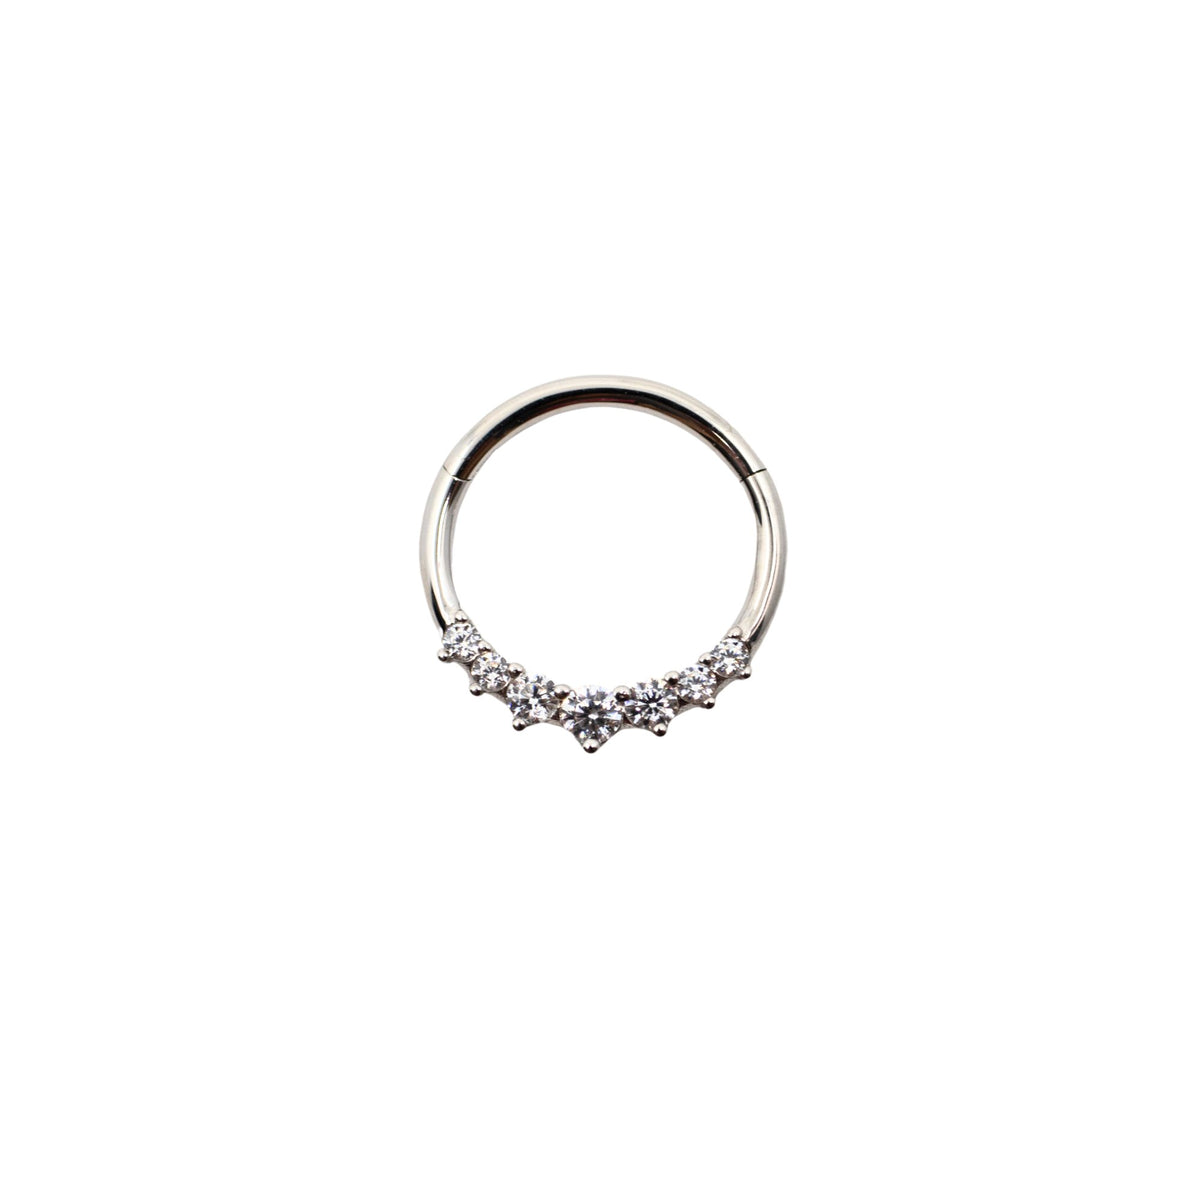 White Gold Hoops Clicker Hoop With Dainty Crystals The Curated Lobe14k goldcartilagecartilage jewelry